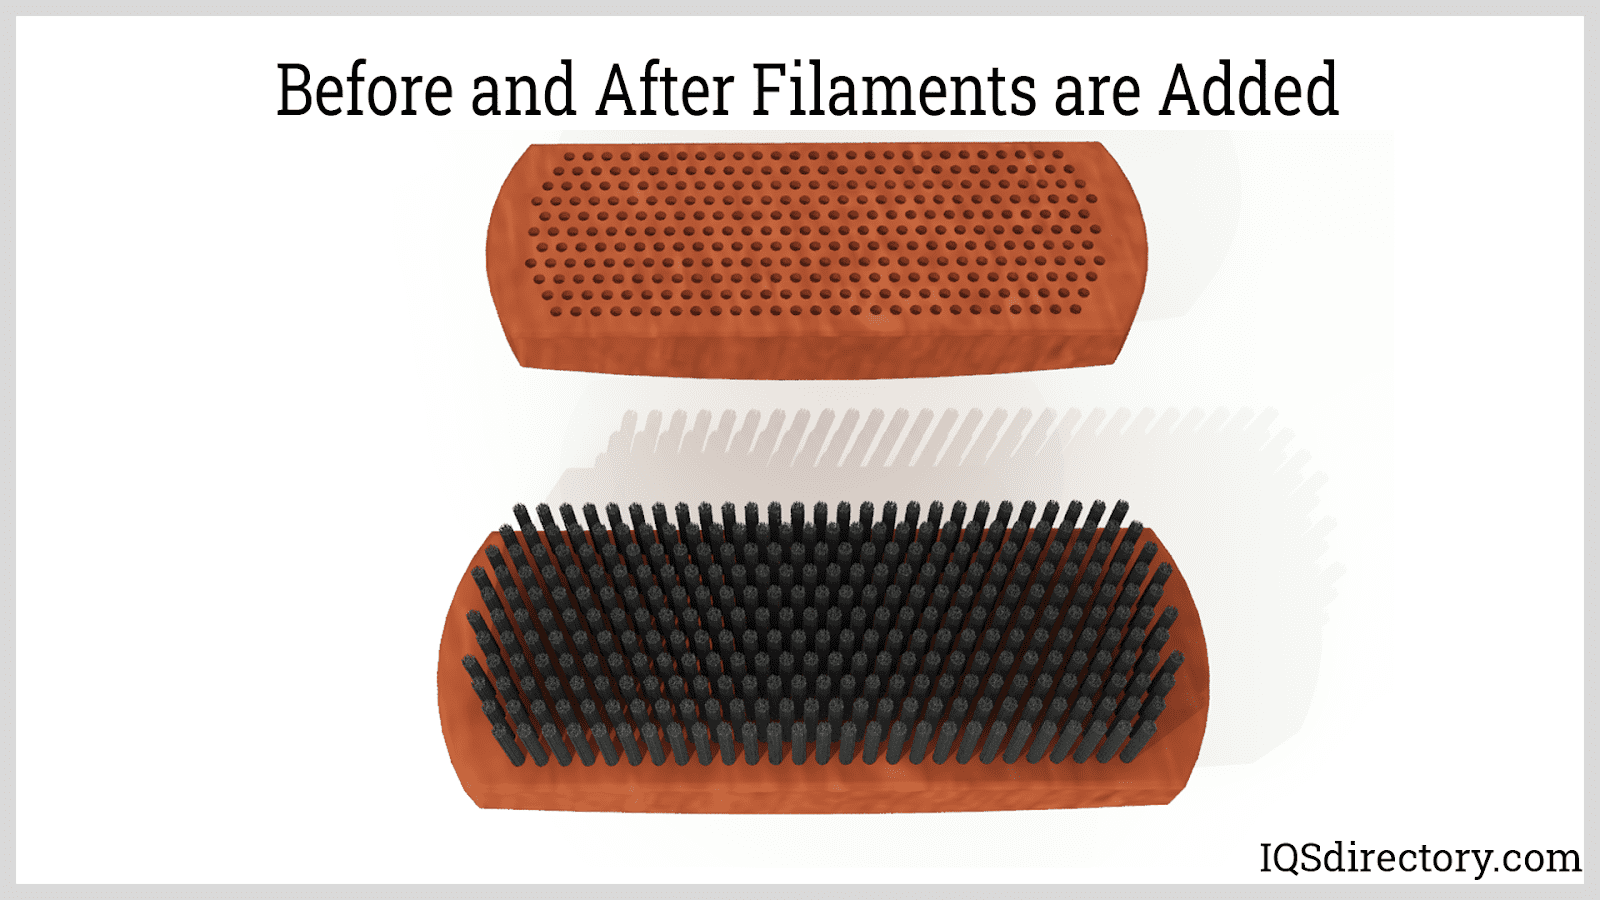 Before and After Filaments are Added